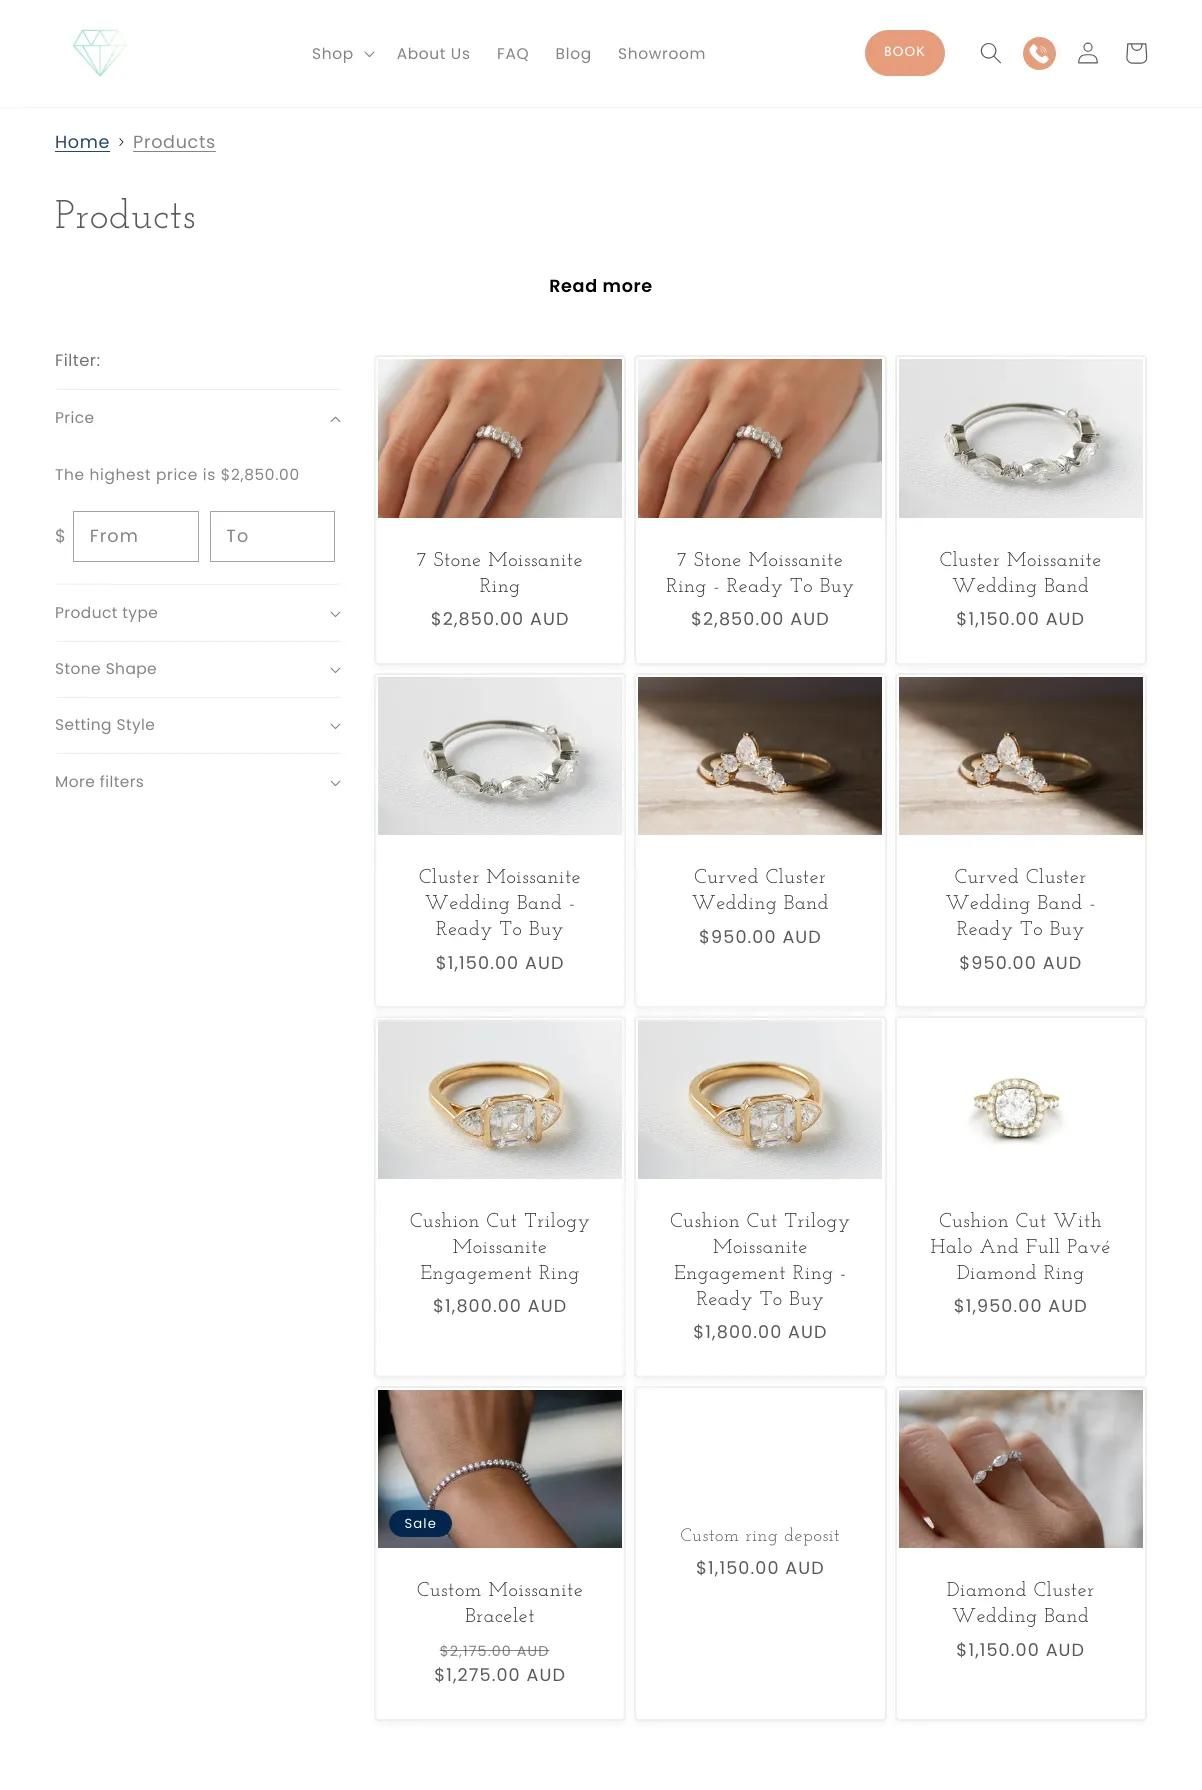 Screenshot 2 of Moissanite Engagement Rings (Example Shopify Jewelry Website)